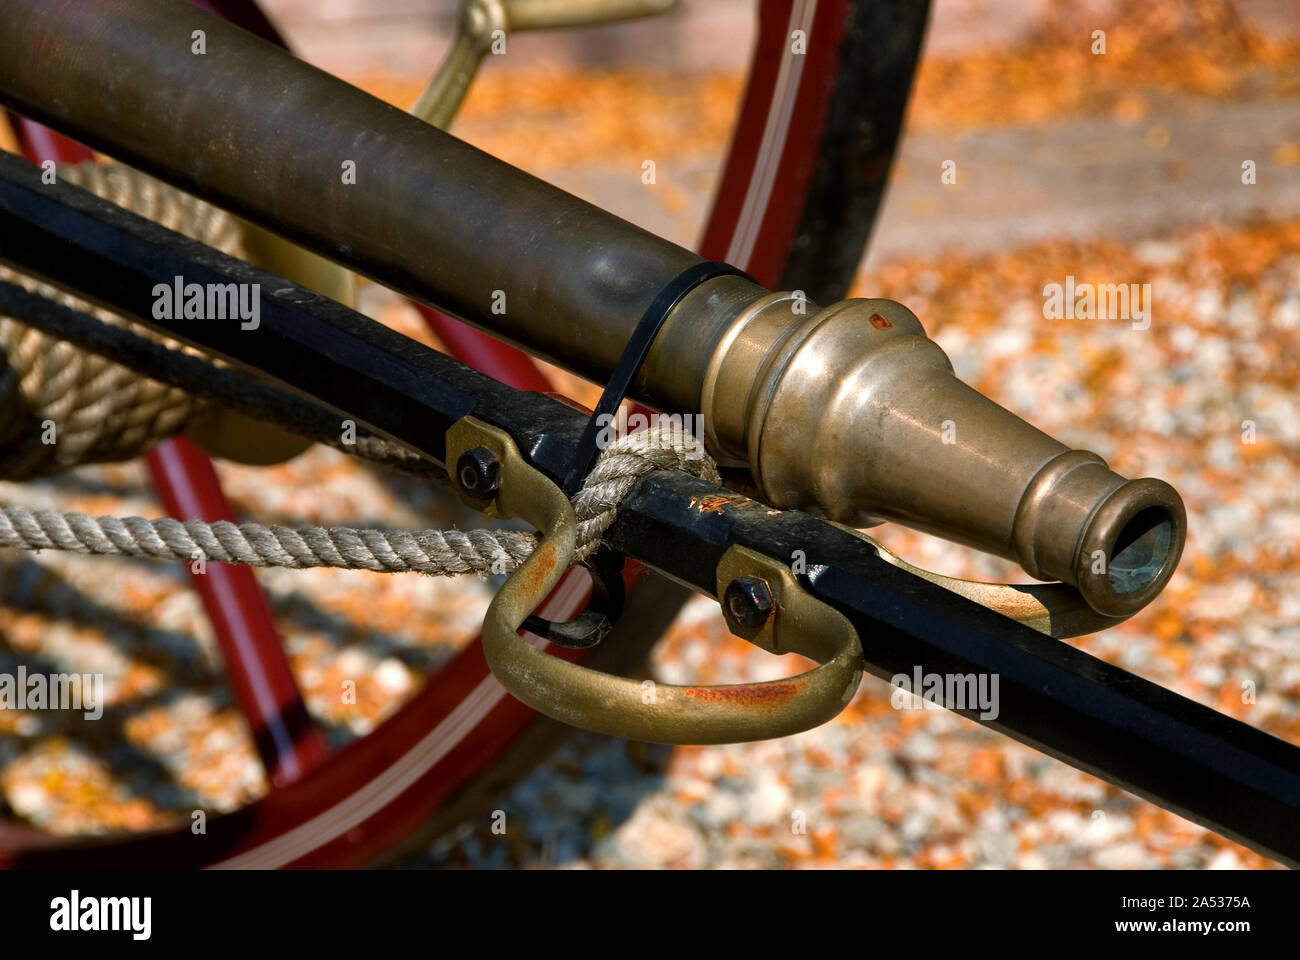 Antique Brass Fire Hose Equipment and Nozzle Stock Photo